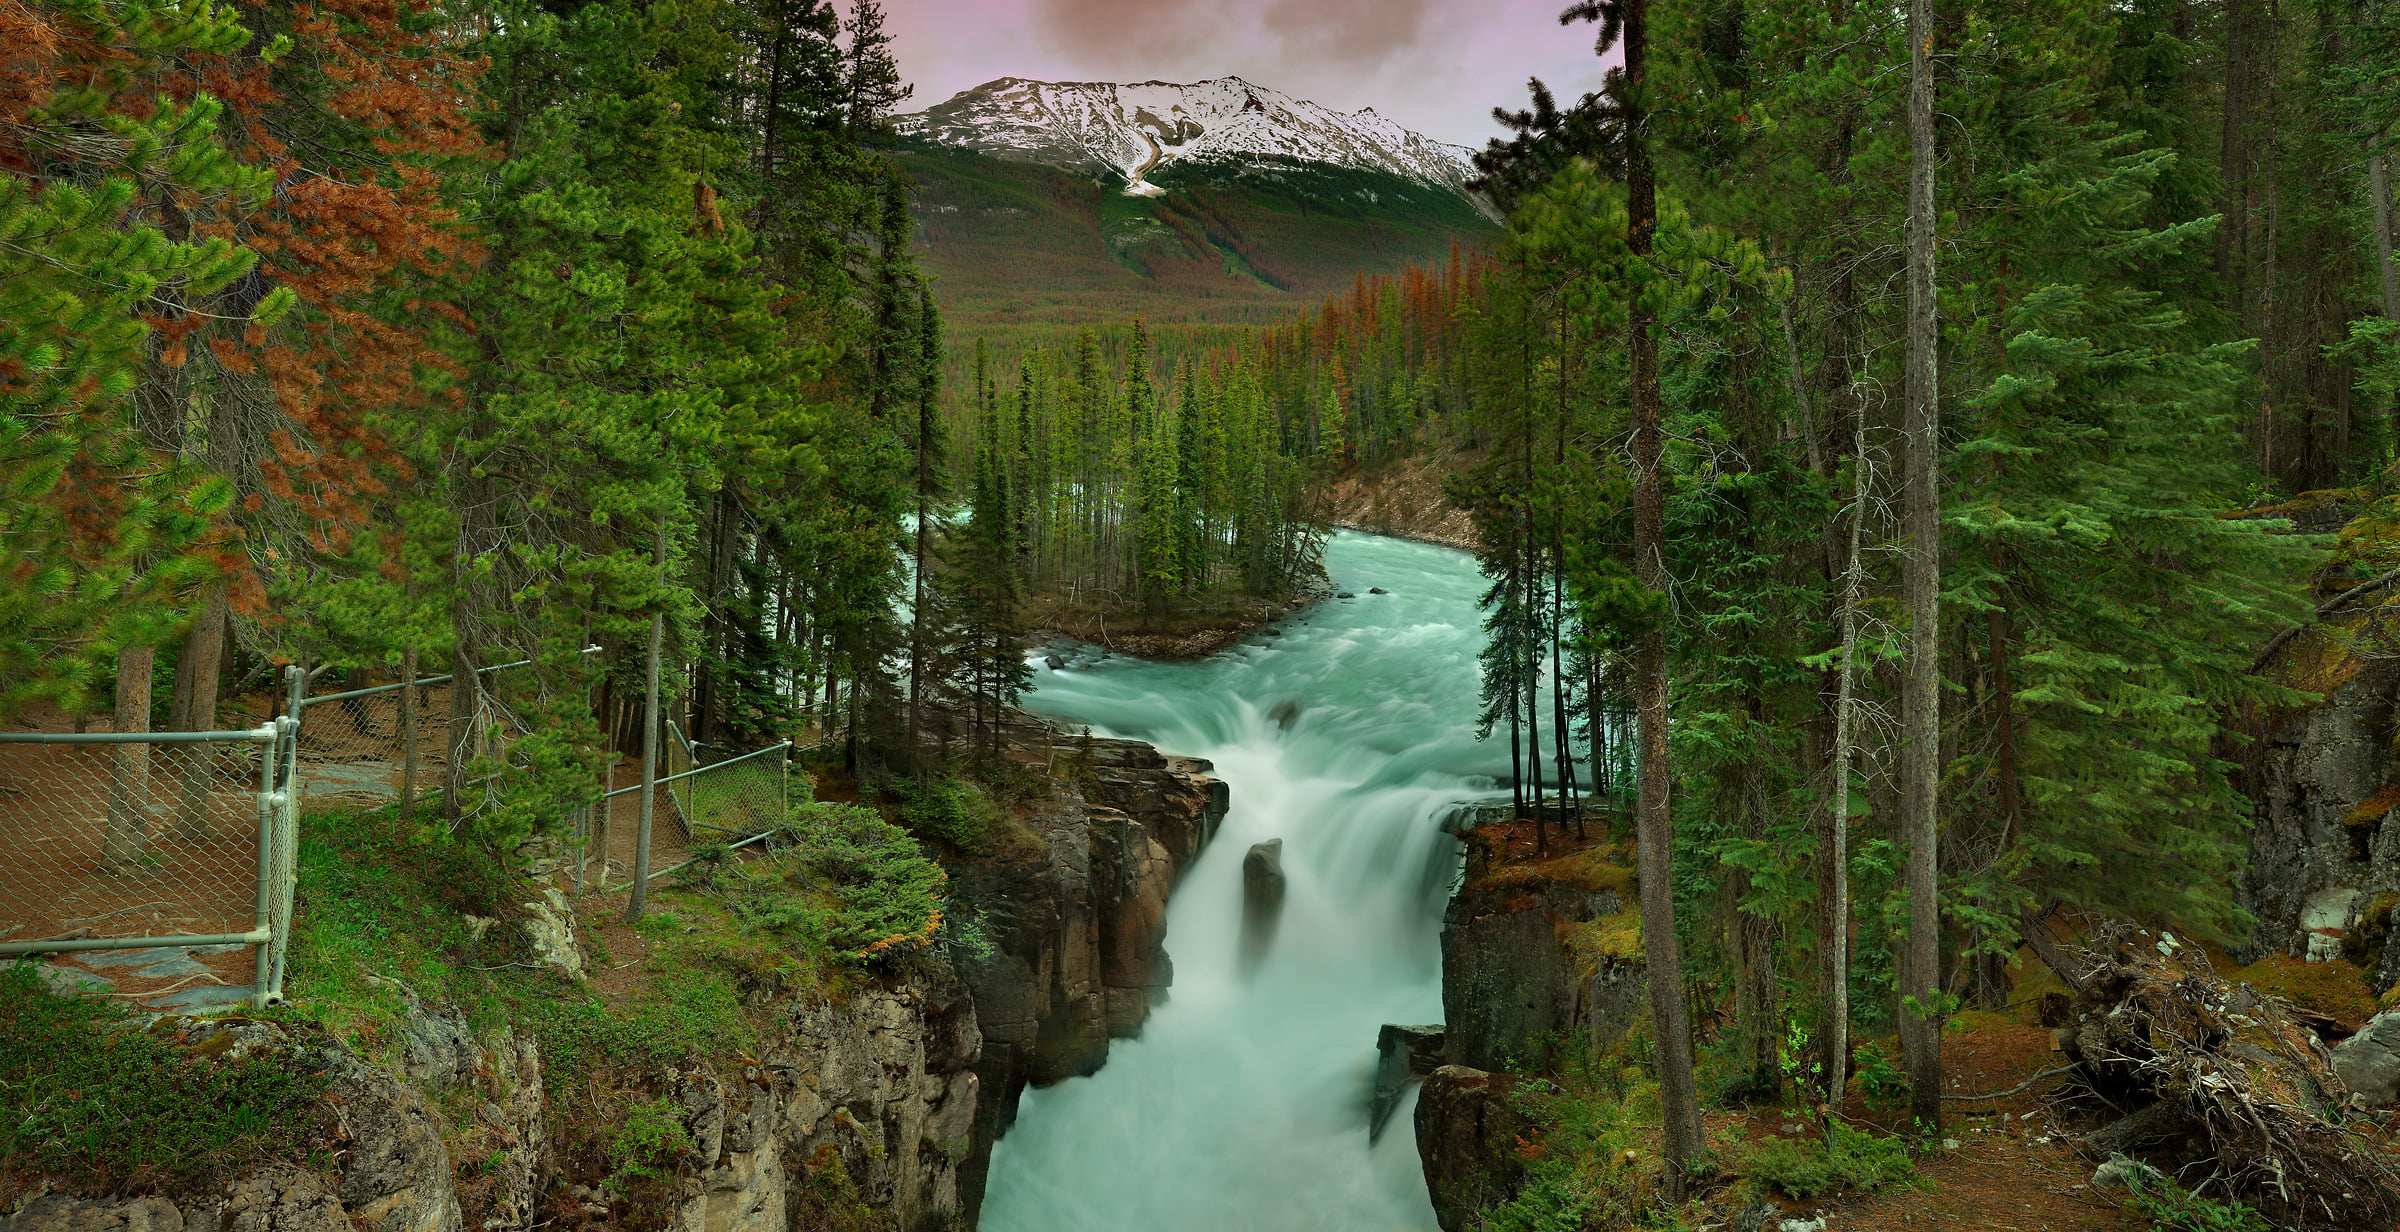 1,682 megapixels! A very high resolution, large-format VAST photo print of woods with a waterfall; nature photograph created by Steve Webster in Sunwapta Falls, Jasper National Park, Alberta Canada